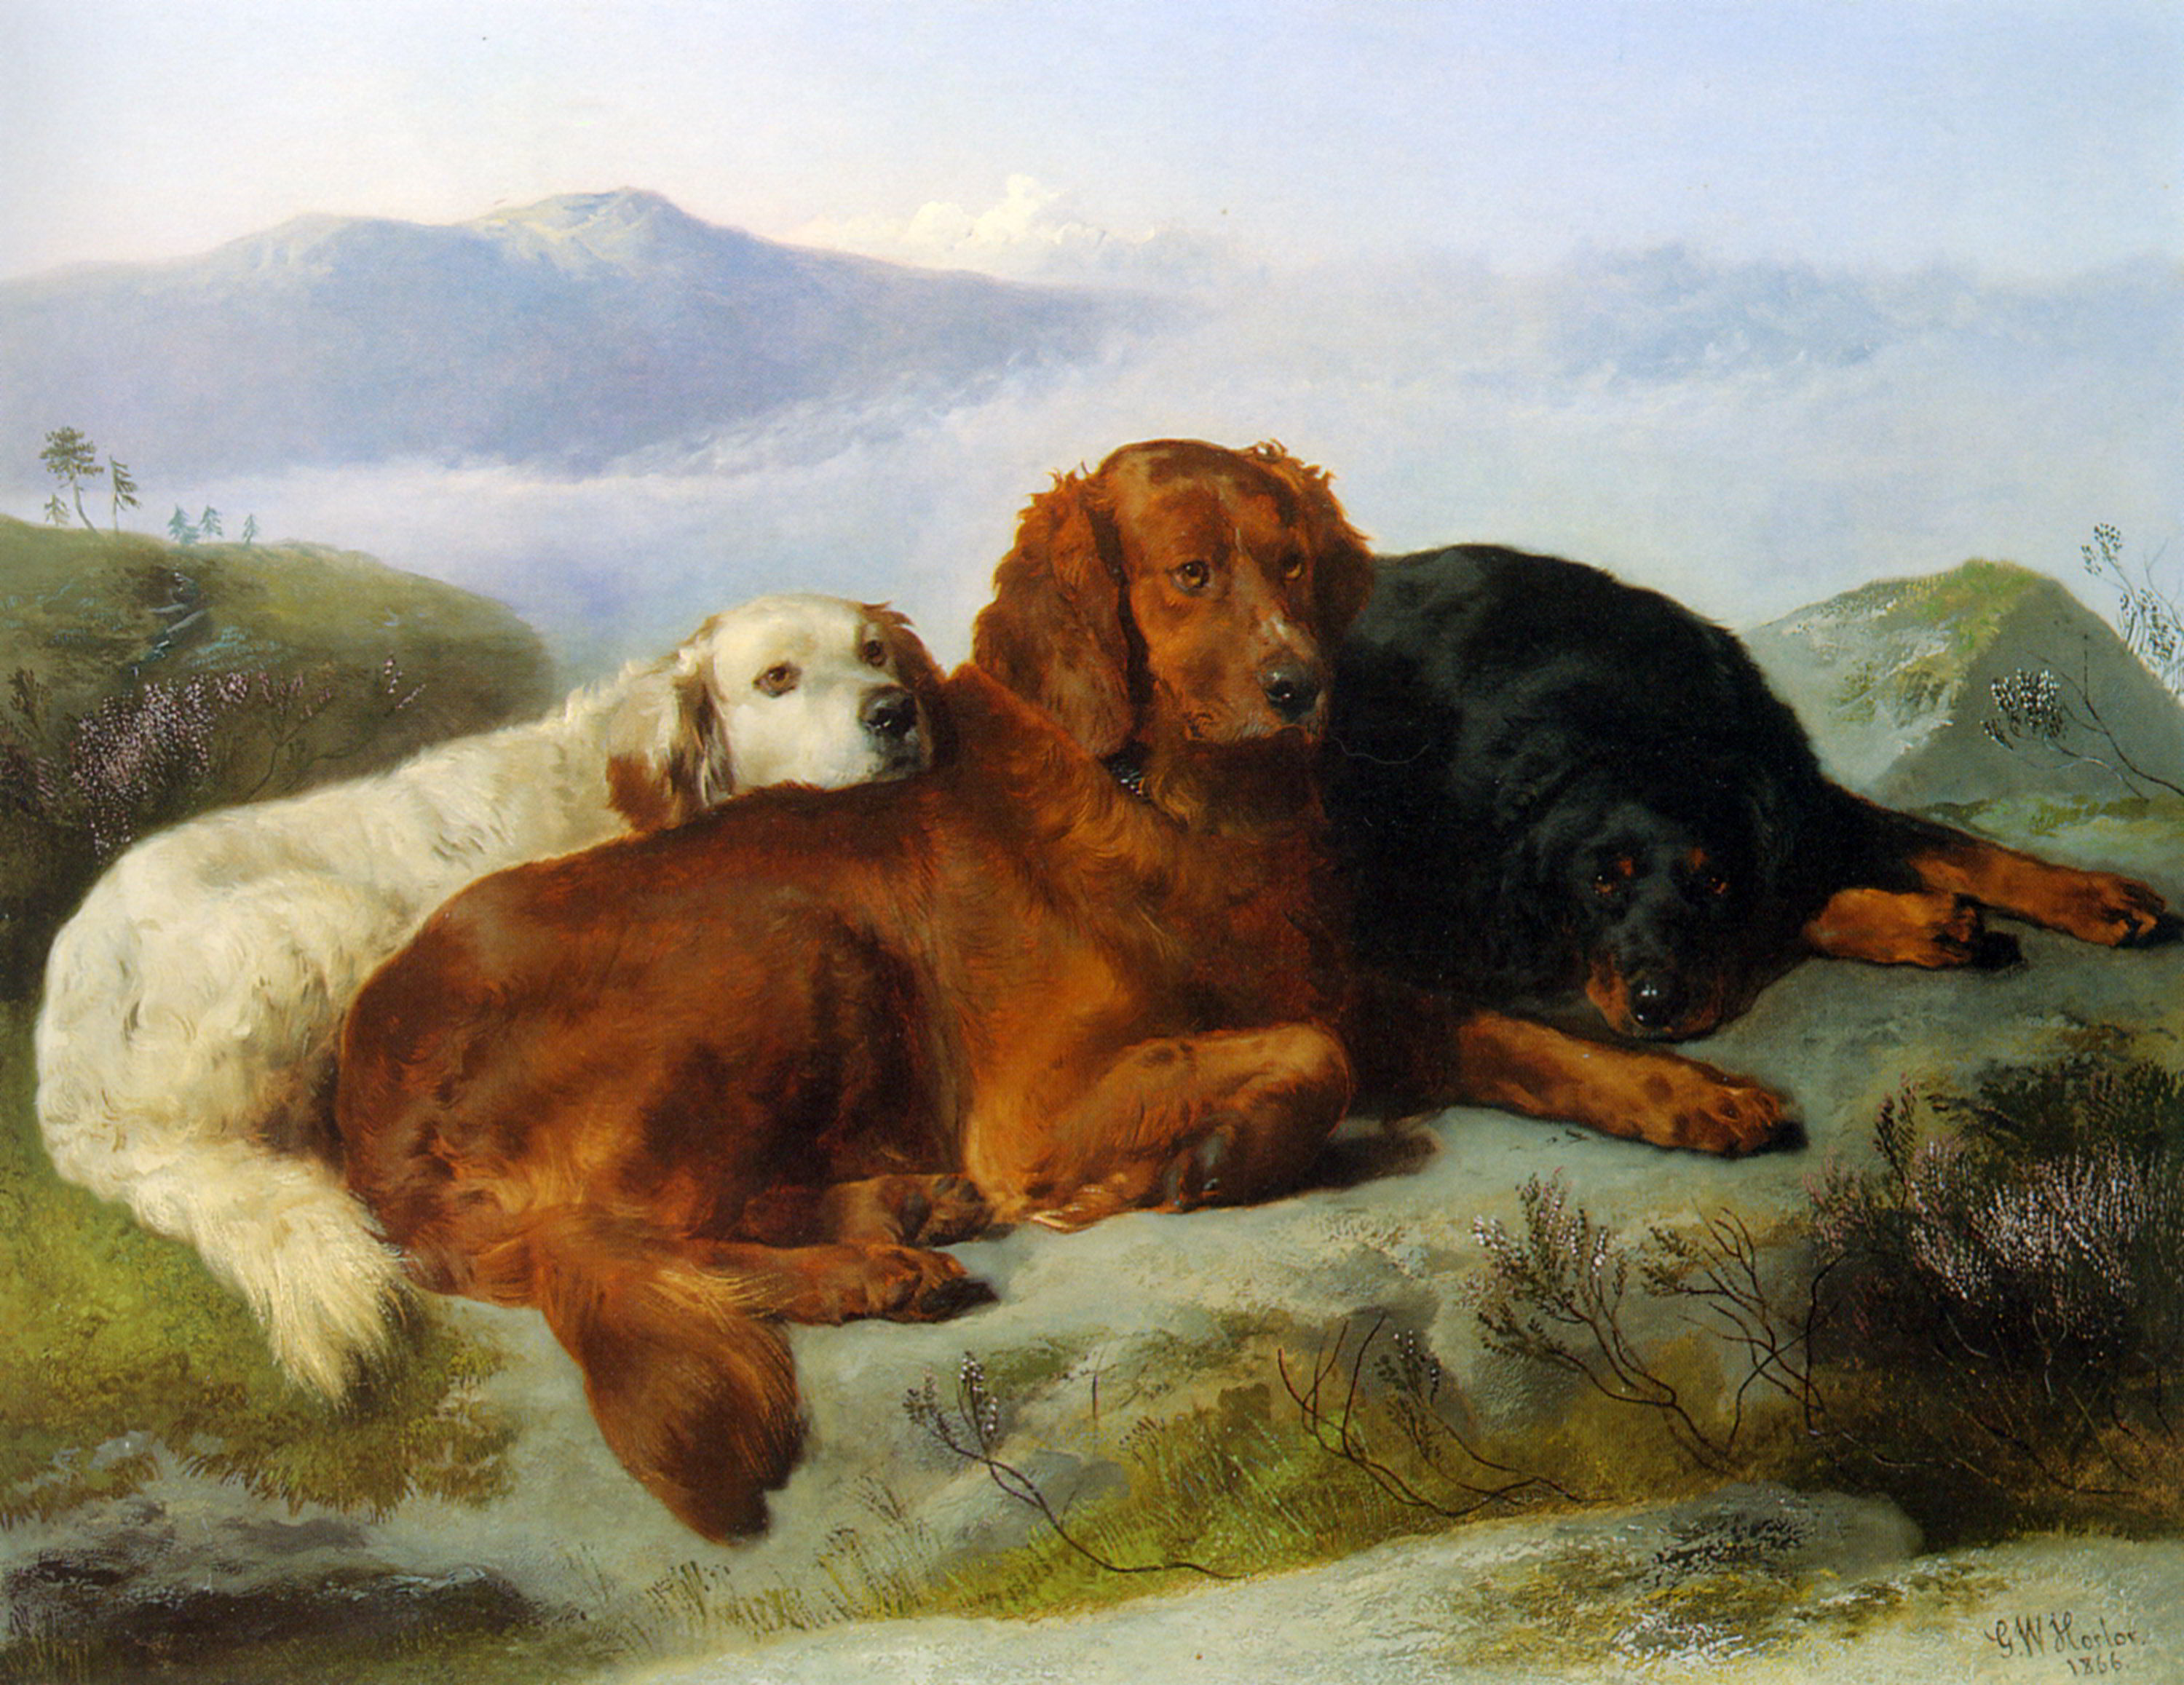 A Golden Retriever, Irish Setter, and a Gordon Setter in a Mountainous Landscape by George W. Horlor